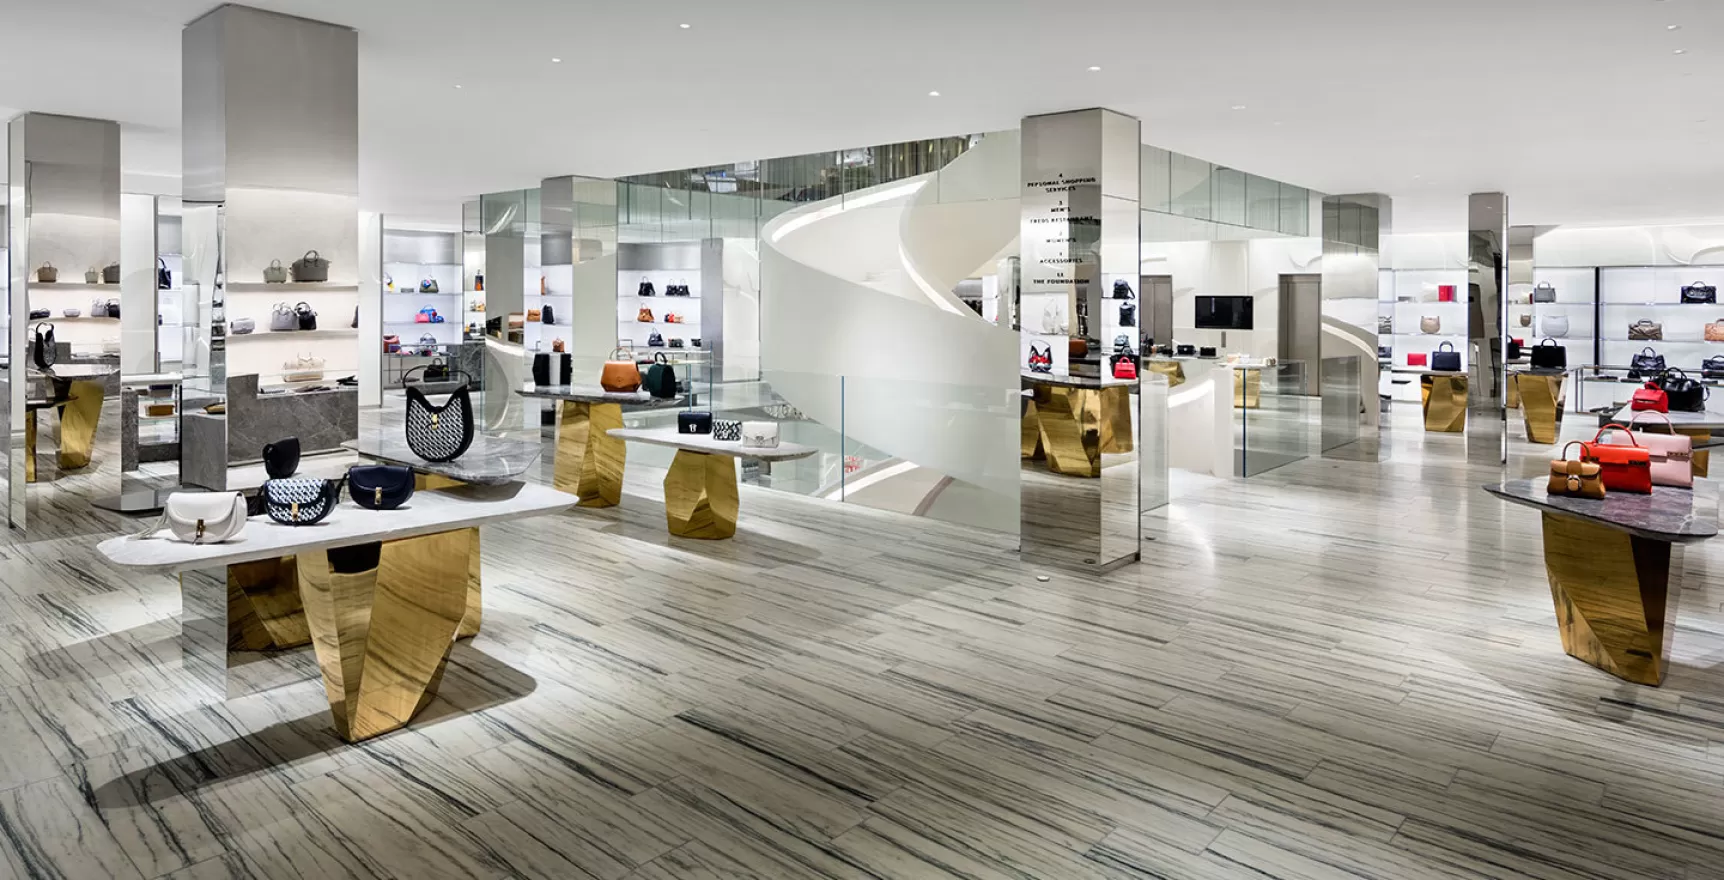 Barneys New York by Steven Harris Architects and Rees Roberts + Partners:  2016 Best of Year Winner for Mixed Retail - Interior Design